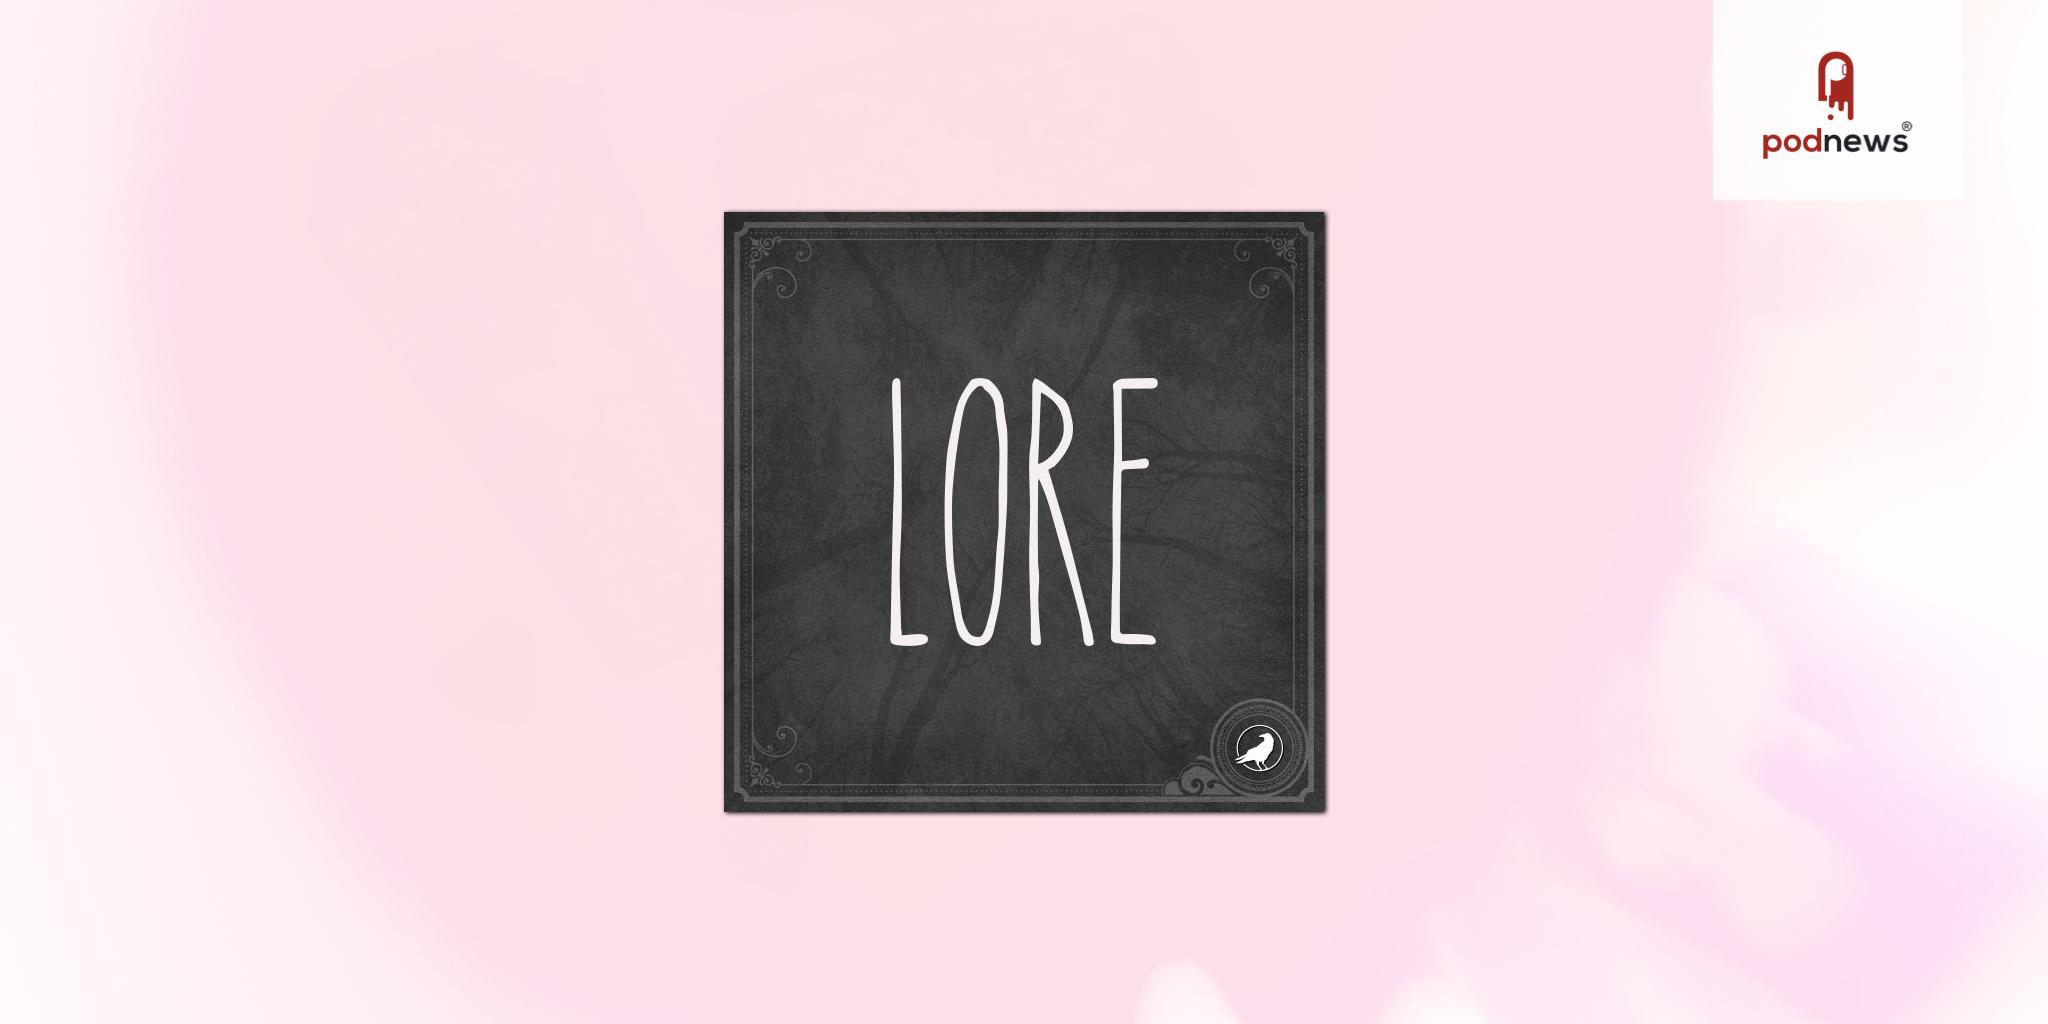 Libsyn’s AdvertiseCast Signs Exclusive Partnership with Lore, the Critically Acclaimed Haunting Podcast